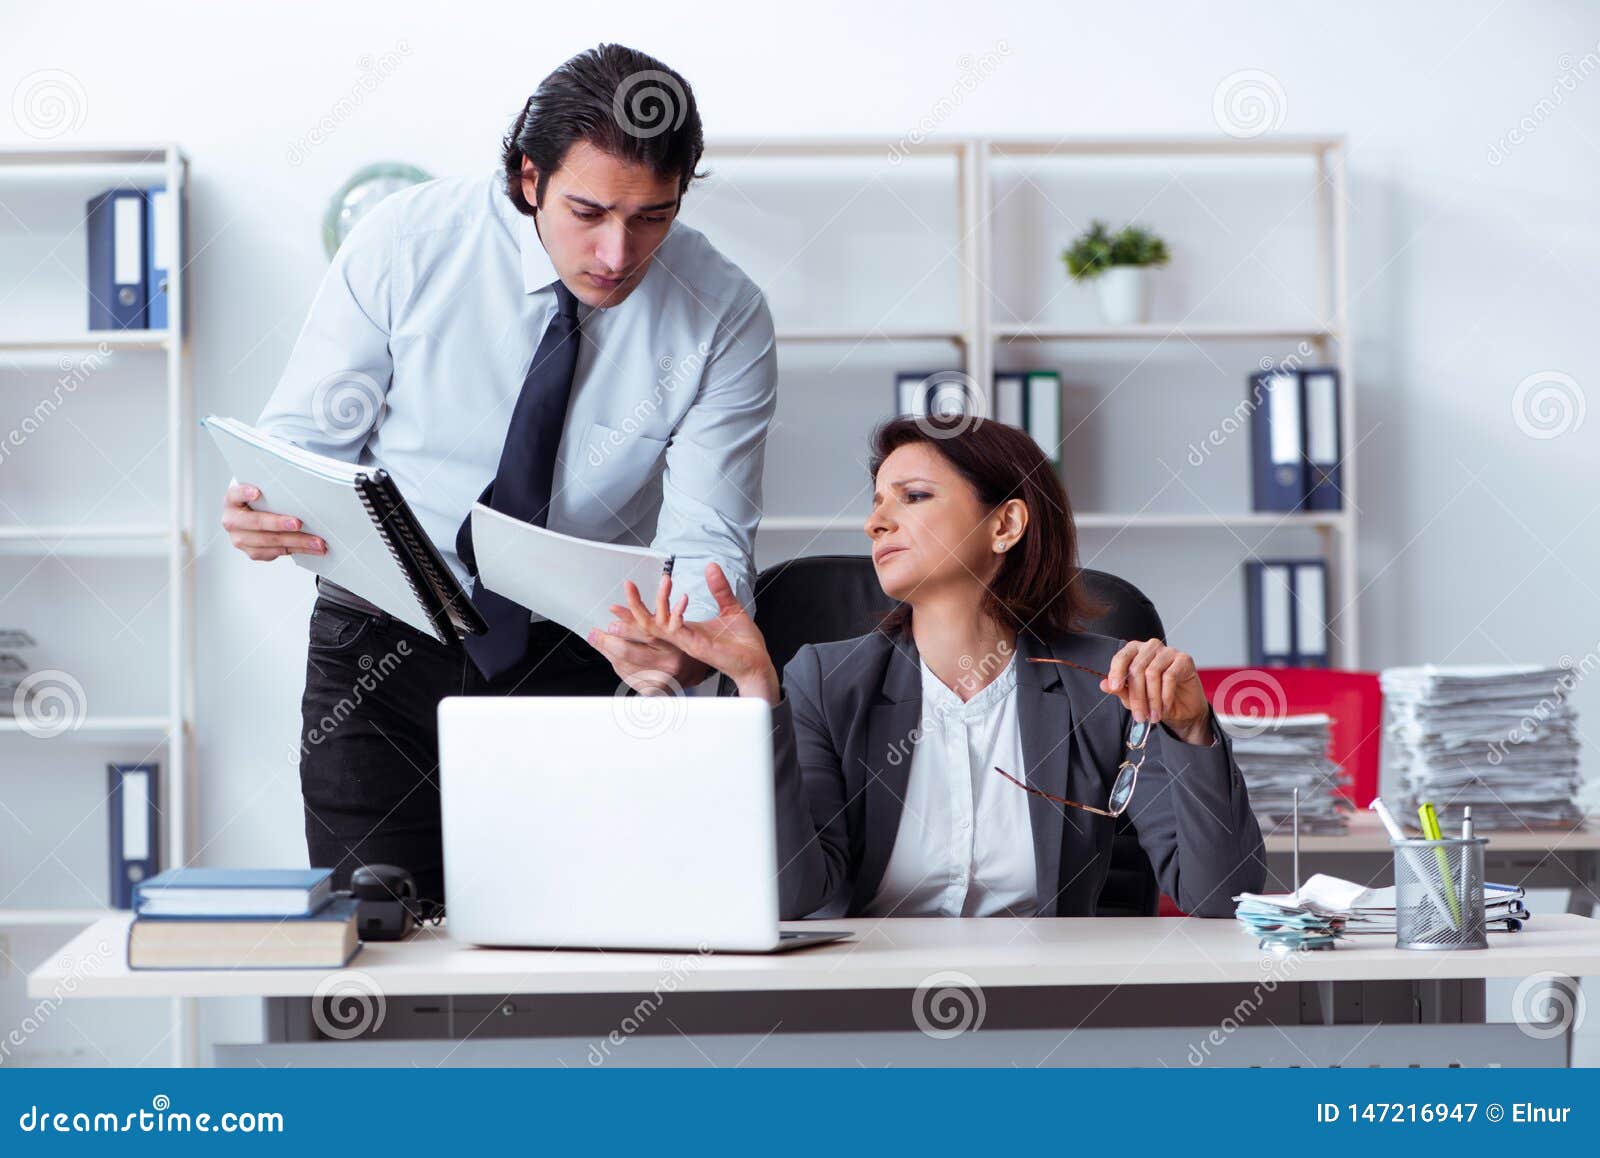 The Old Female Boss and Young Male Employee in the Office Stock Image -  Image of manager, assistant: 147216947